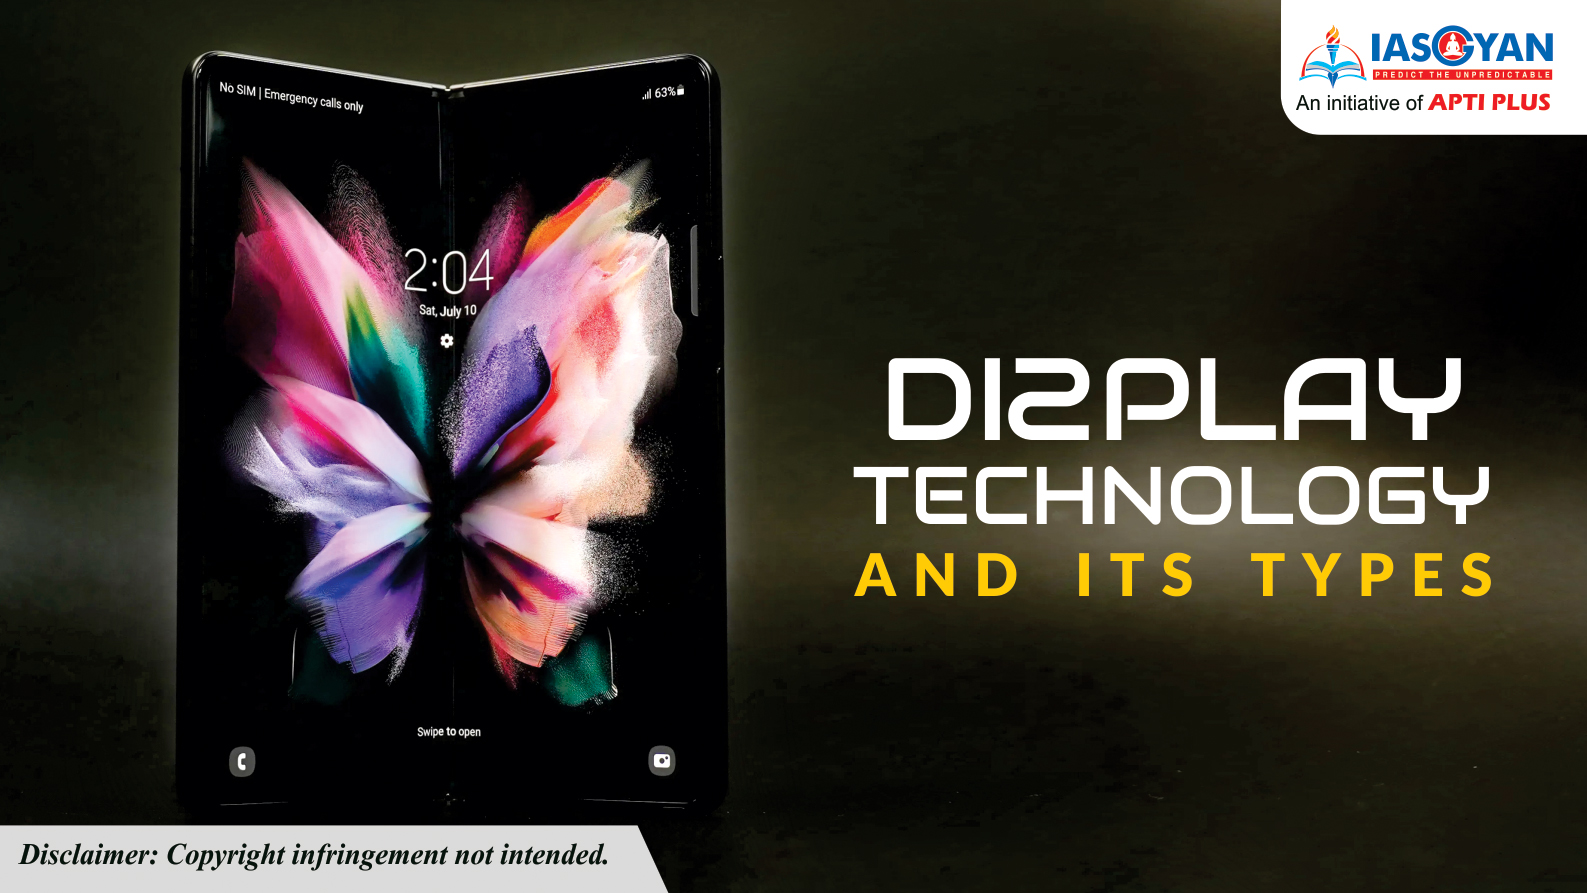 DISPLAY TECHNOLOGY AND ITS TYPES